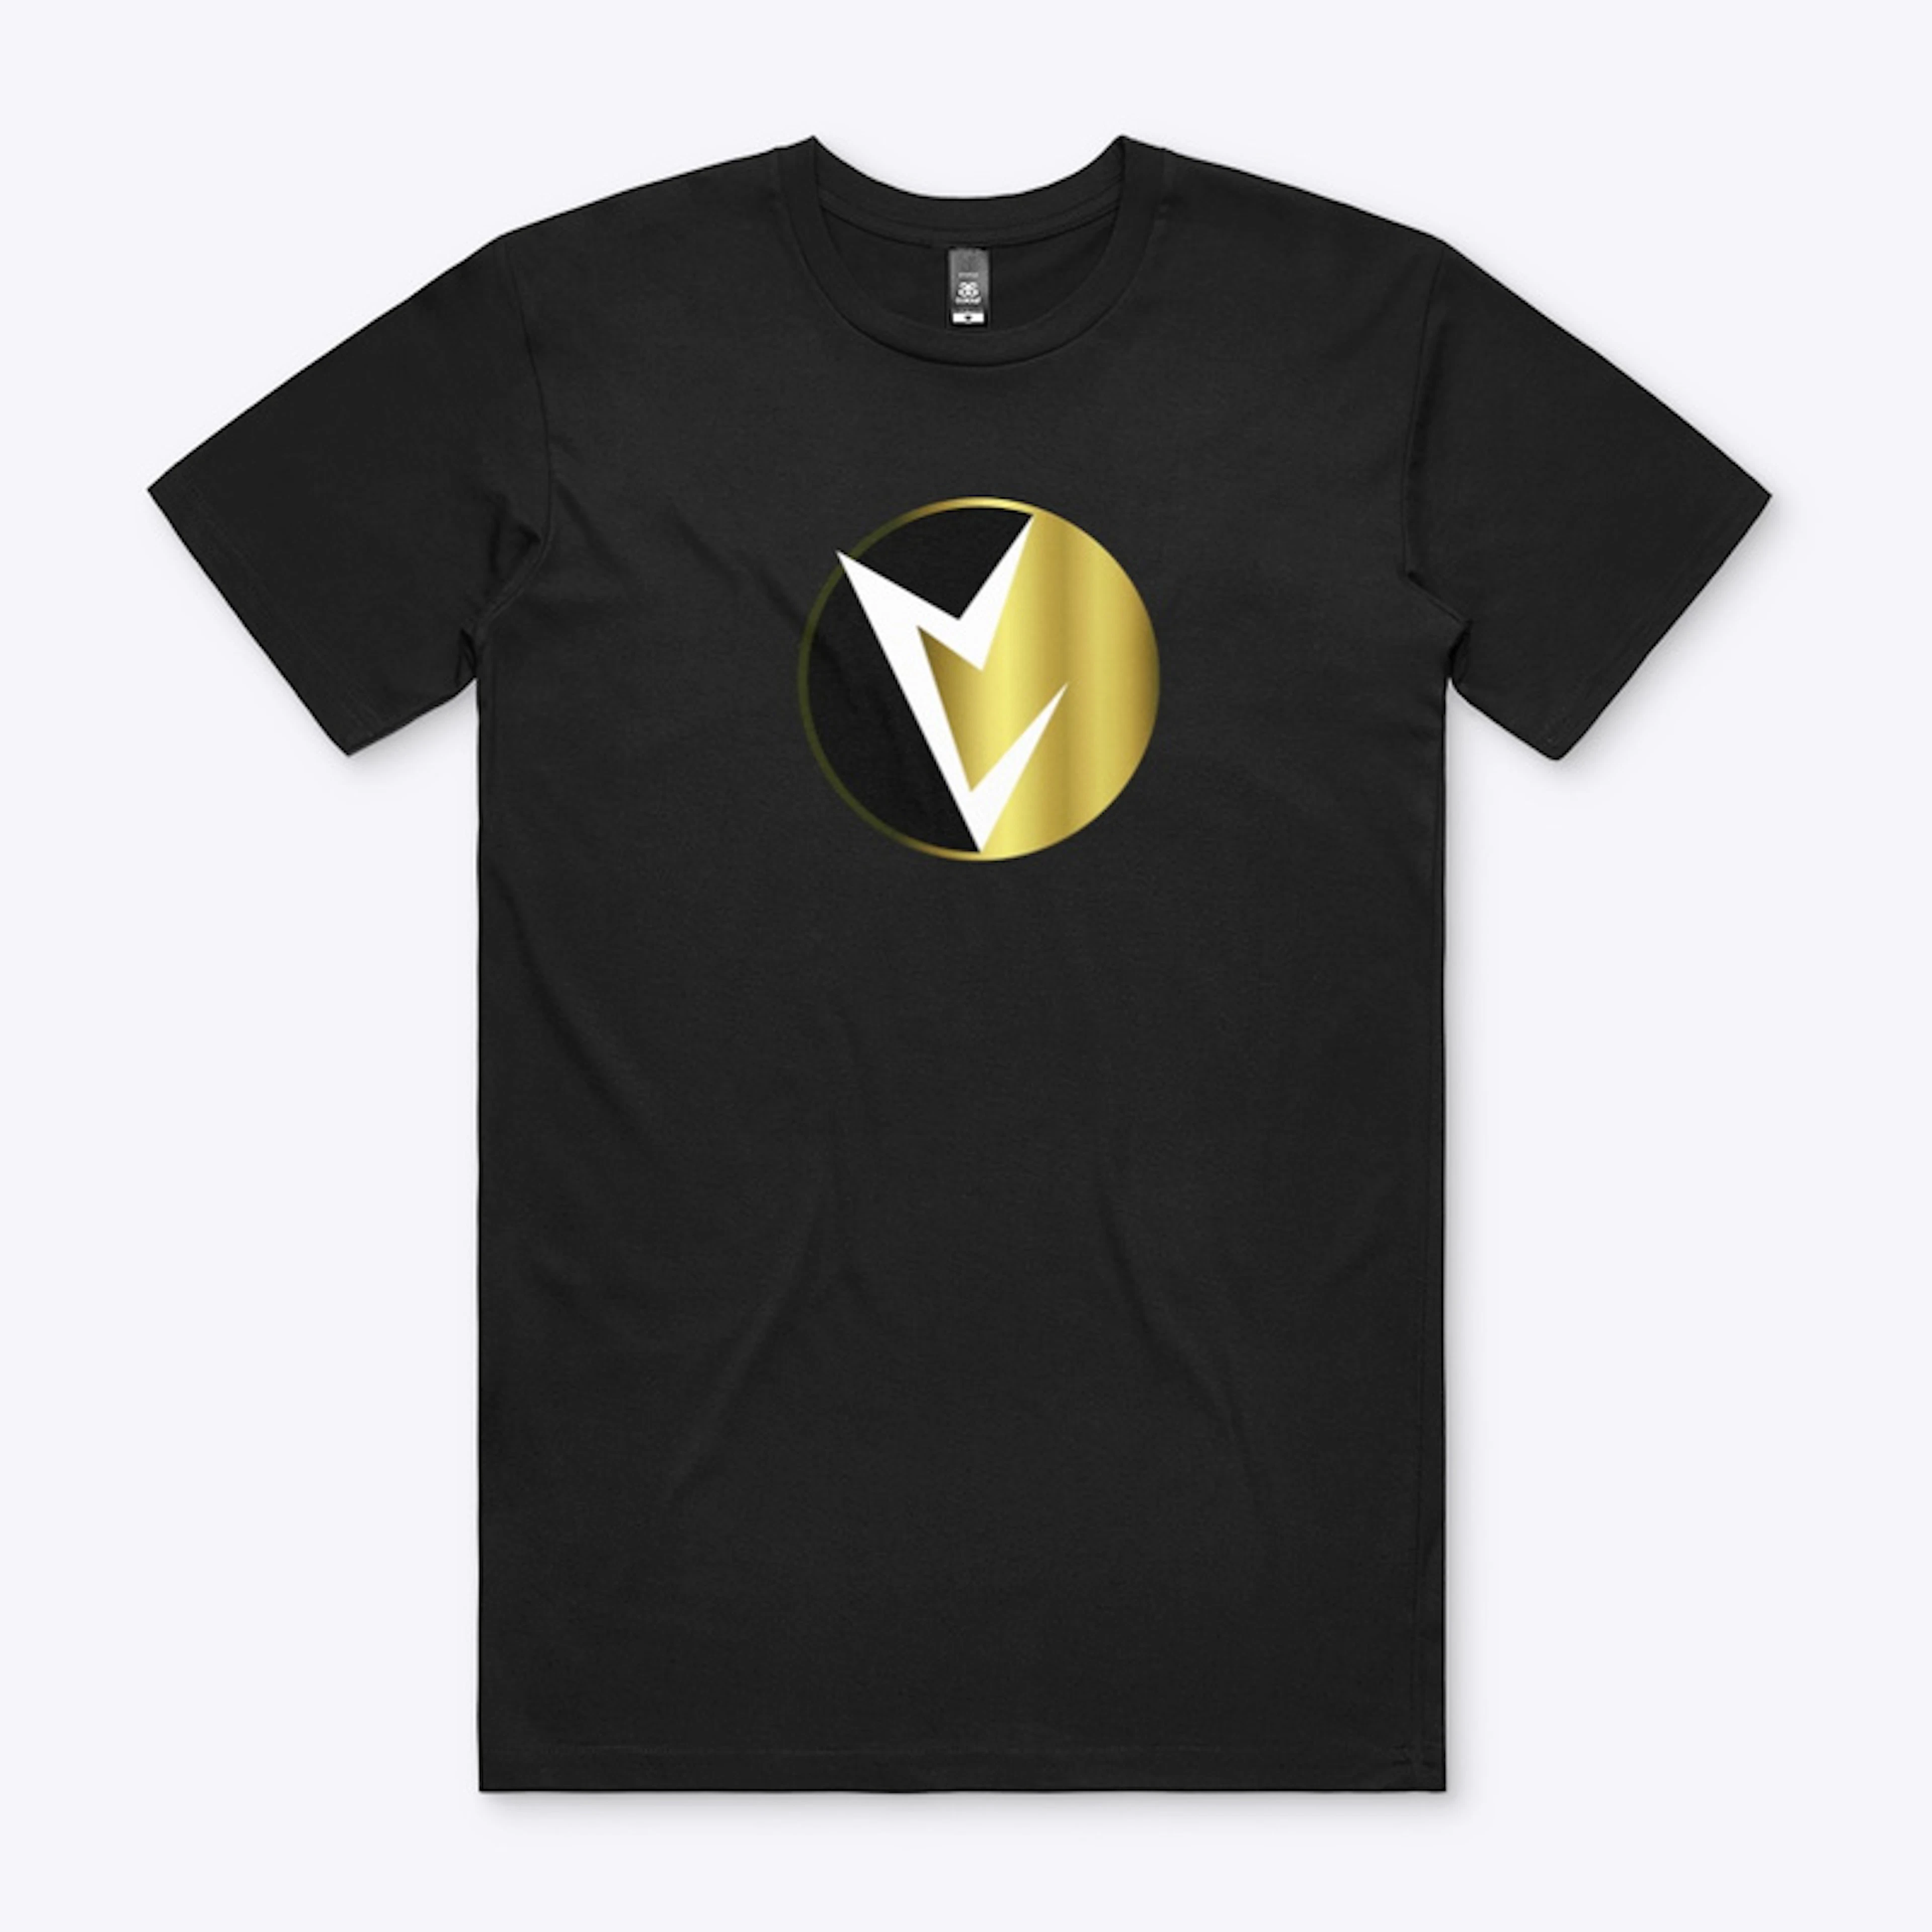 Golden Vril Society Symbol Collection